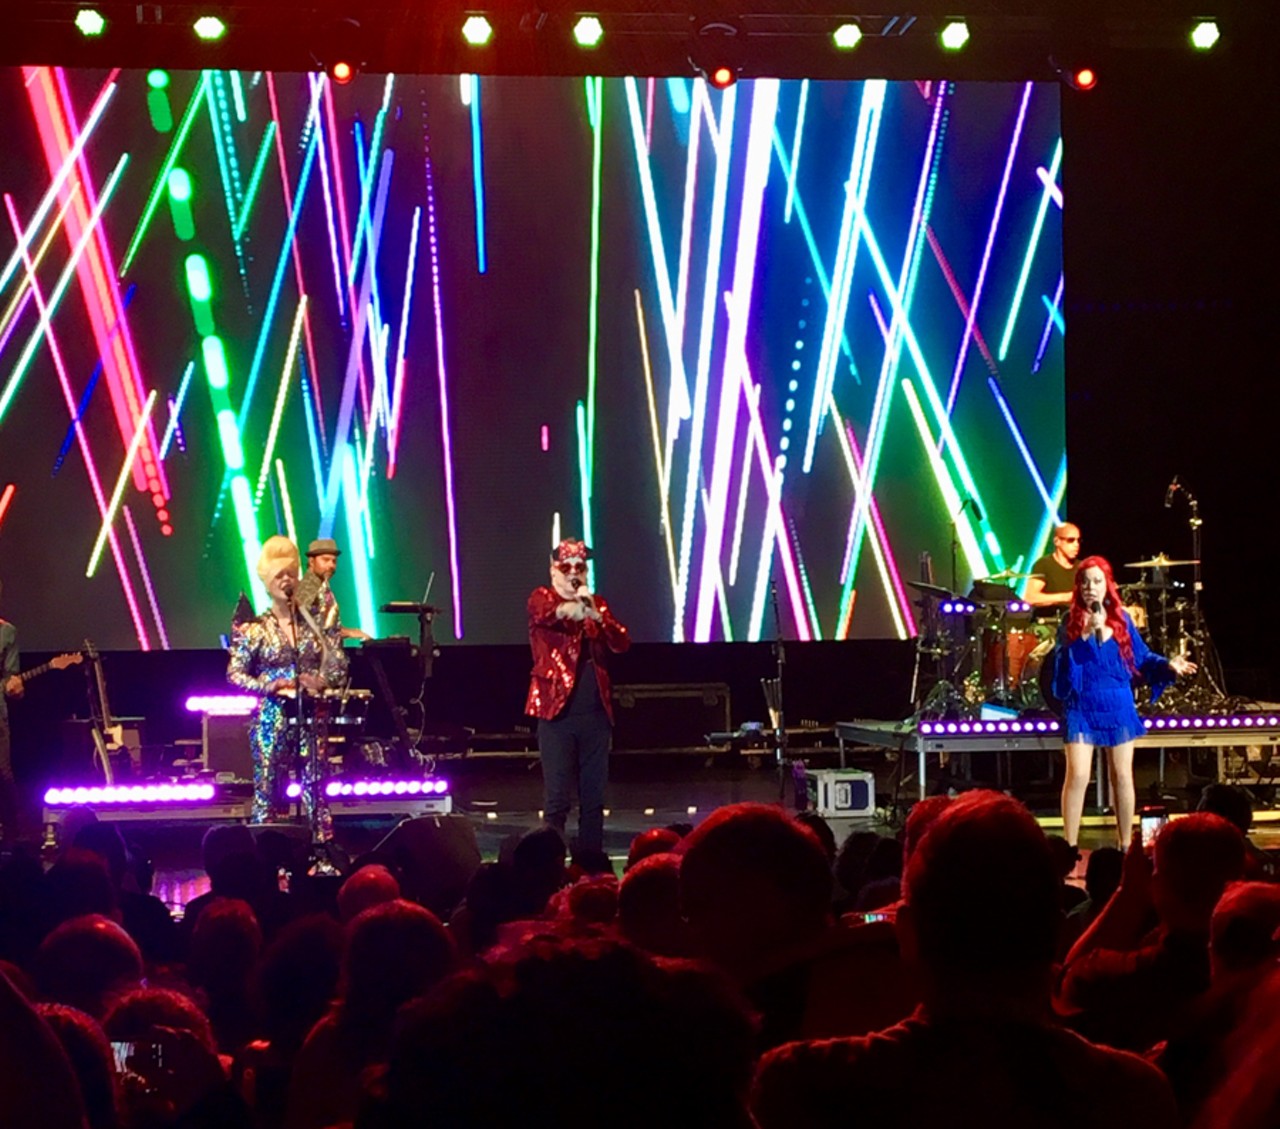 All the new wavers we saw at the B-52s, OMD, and Berlin show at Meadow Brook Amphitheatre